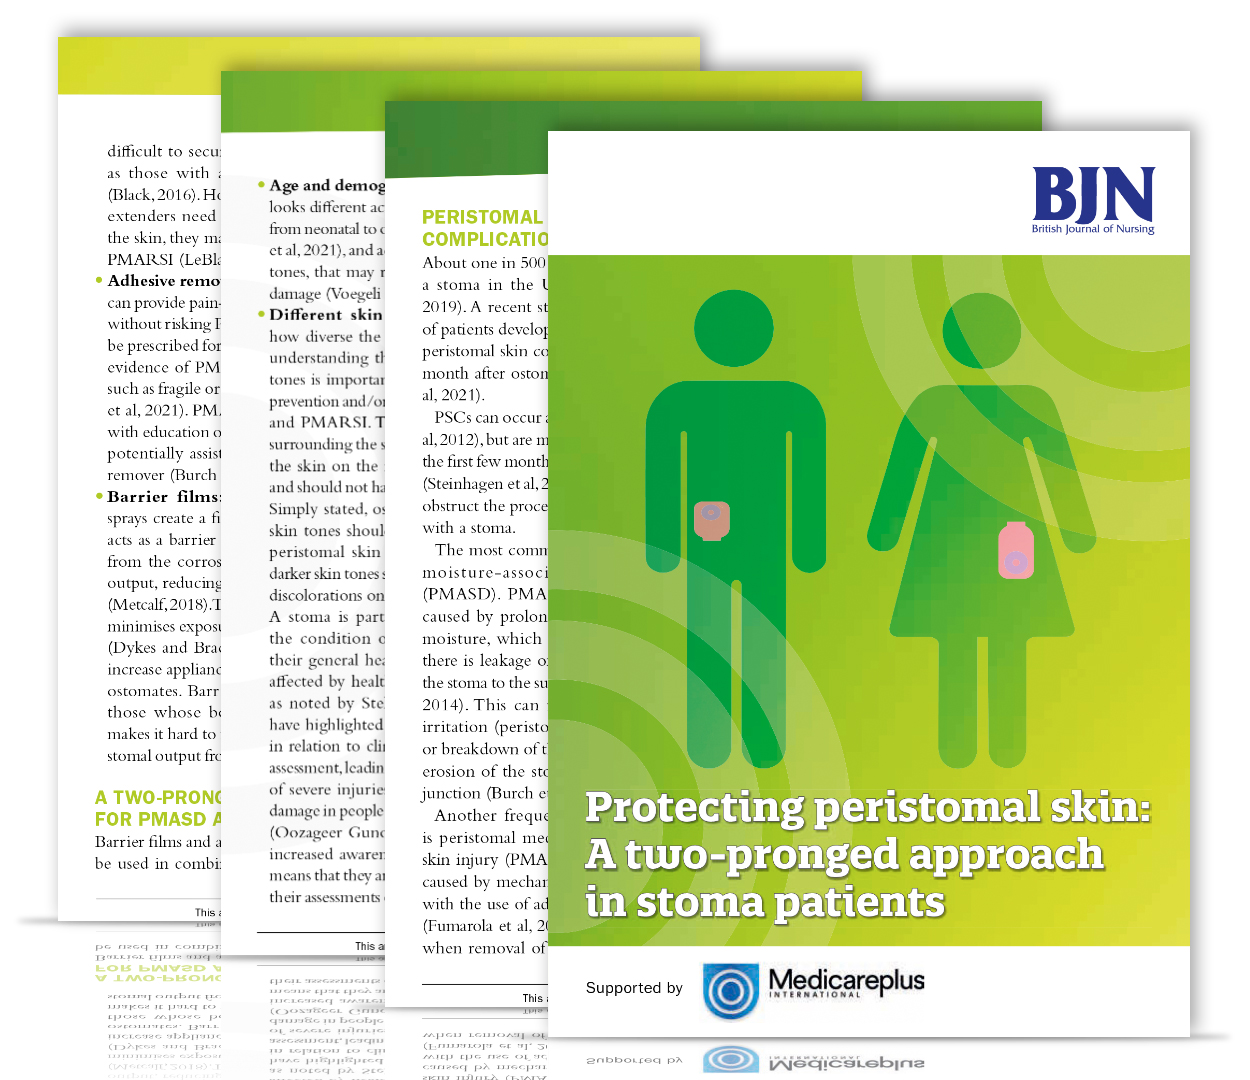 Stoma Mini Guide; Protecting Peristomal skin: A two-pronged approach in stoma patients